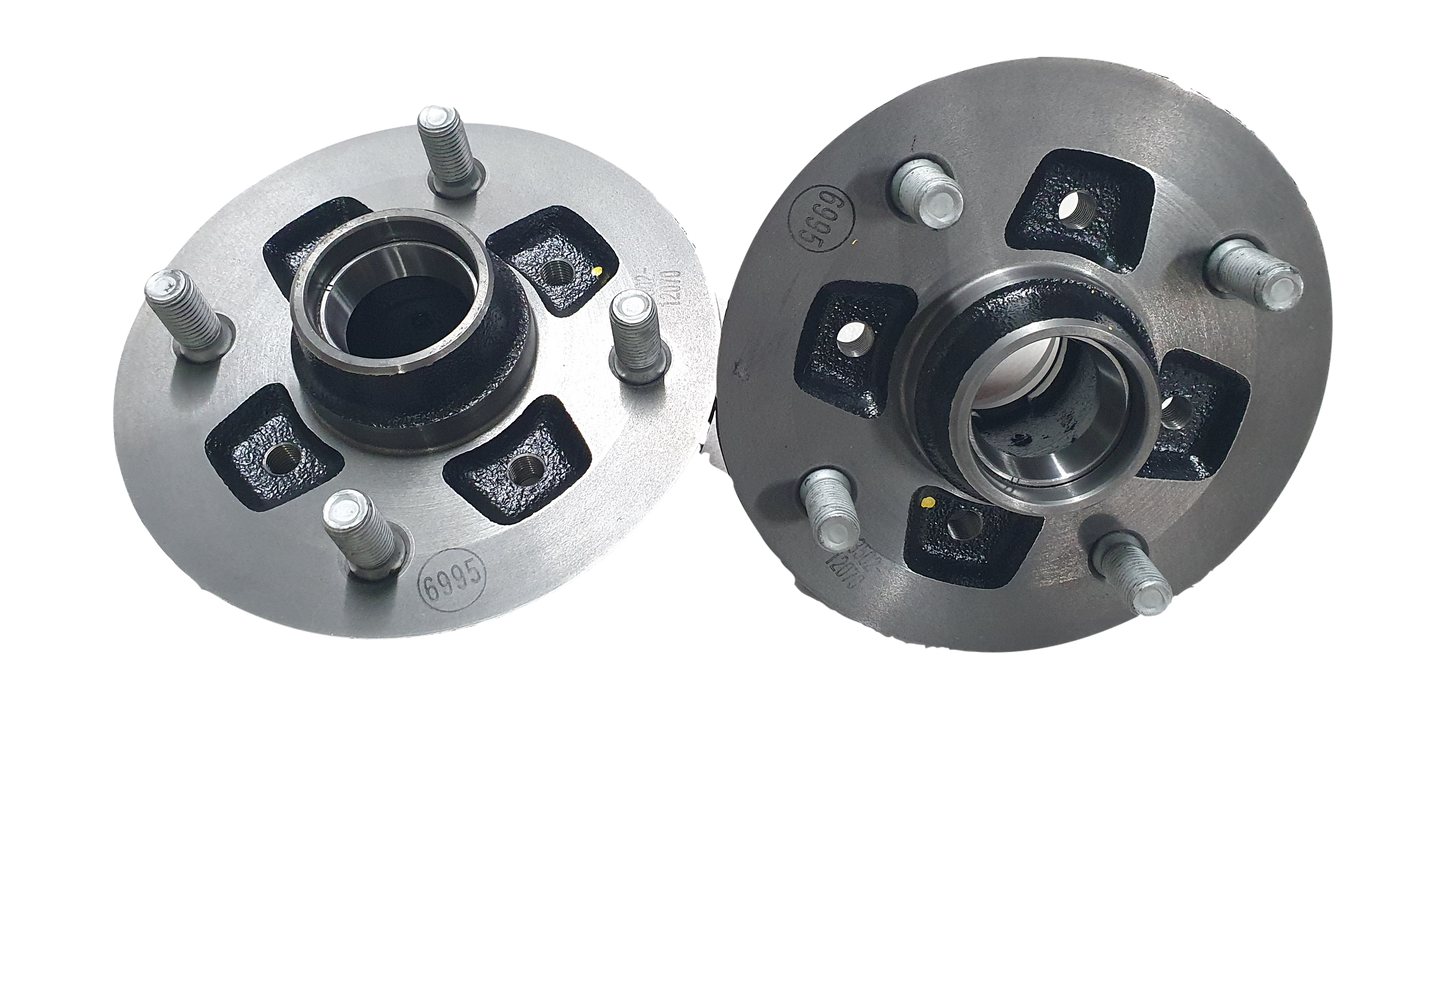 AE86 front hubs